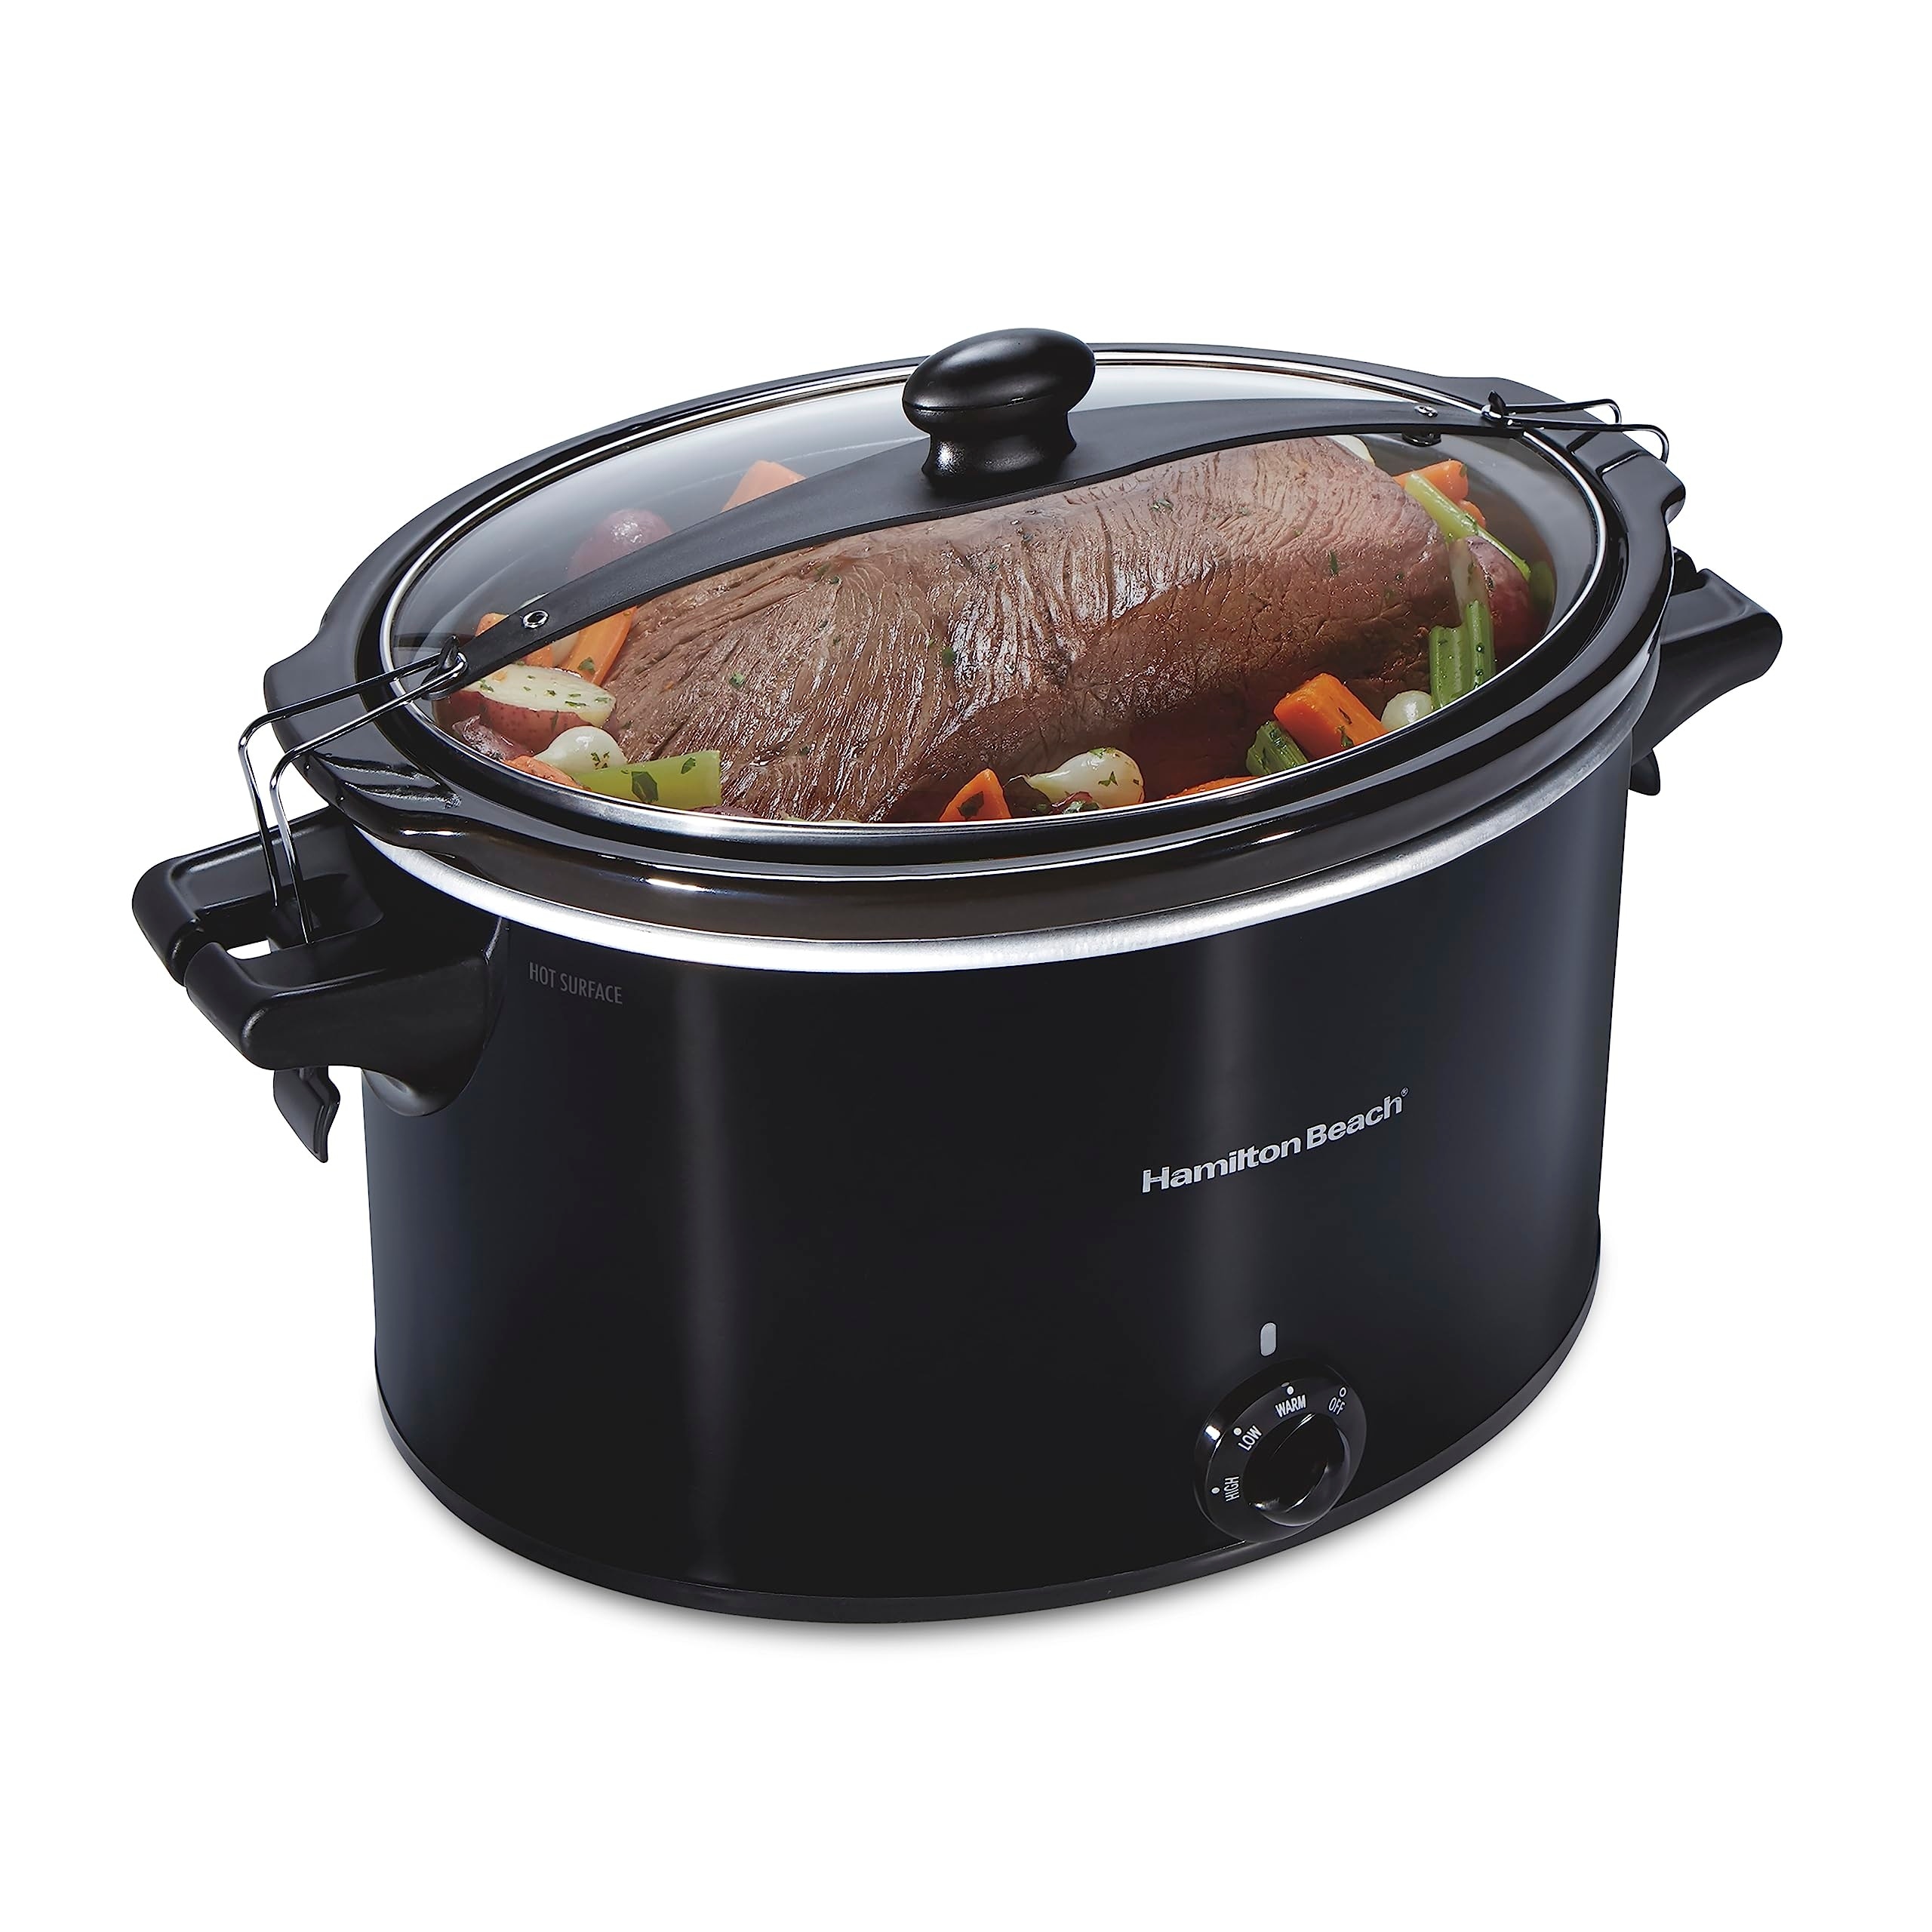 https://ak1.ostkcdn.com/images/products/is/images/direct/5498cd01f56ee53d42141959ce20c9b60a396e9e/Slow-Cooker%2C-Extra-Large-10-Quart%2C-Stay-or-Go-Portable-With-Lid-Lock%2C-Dishwasher-Safe-Crock.jpg